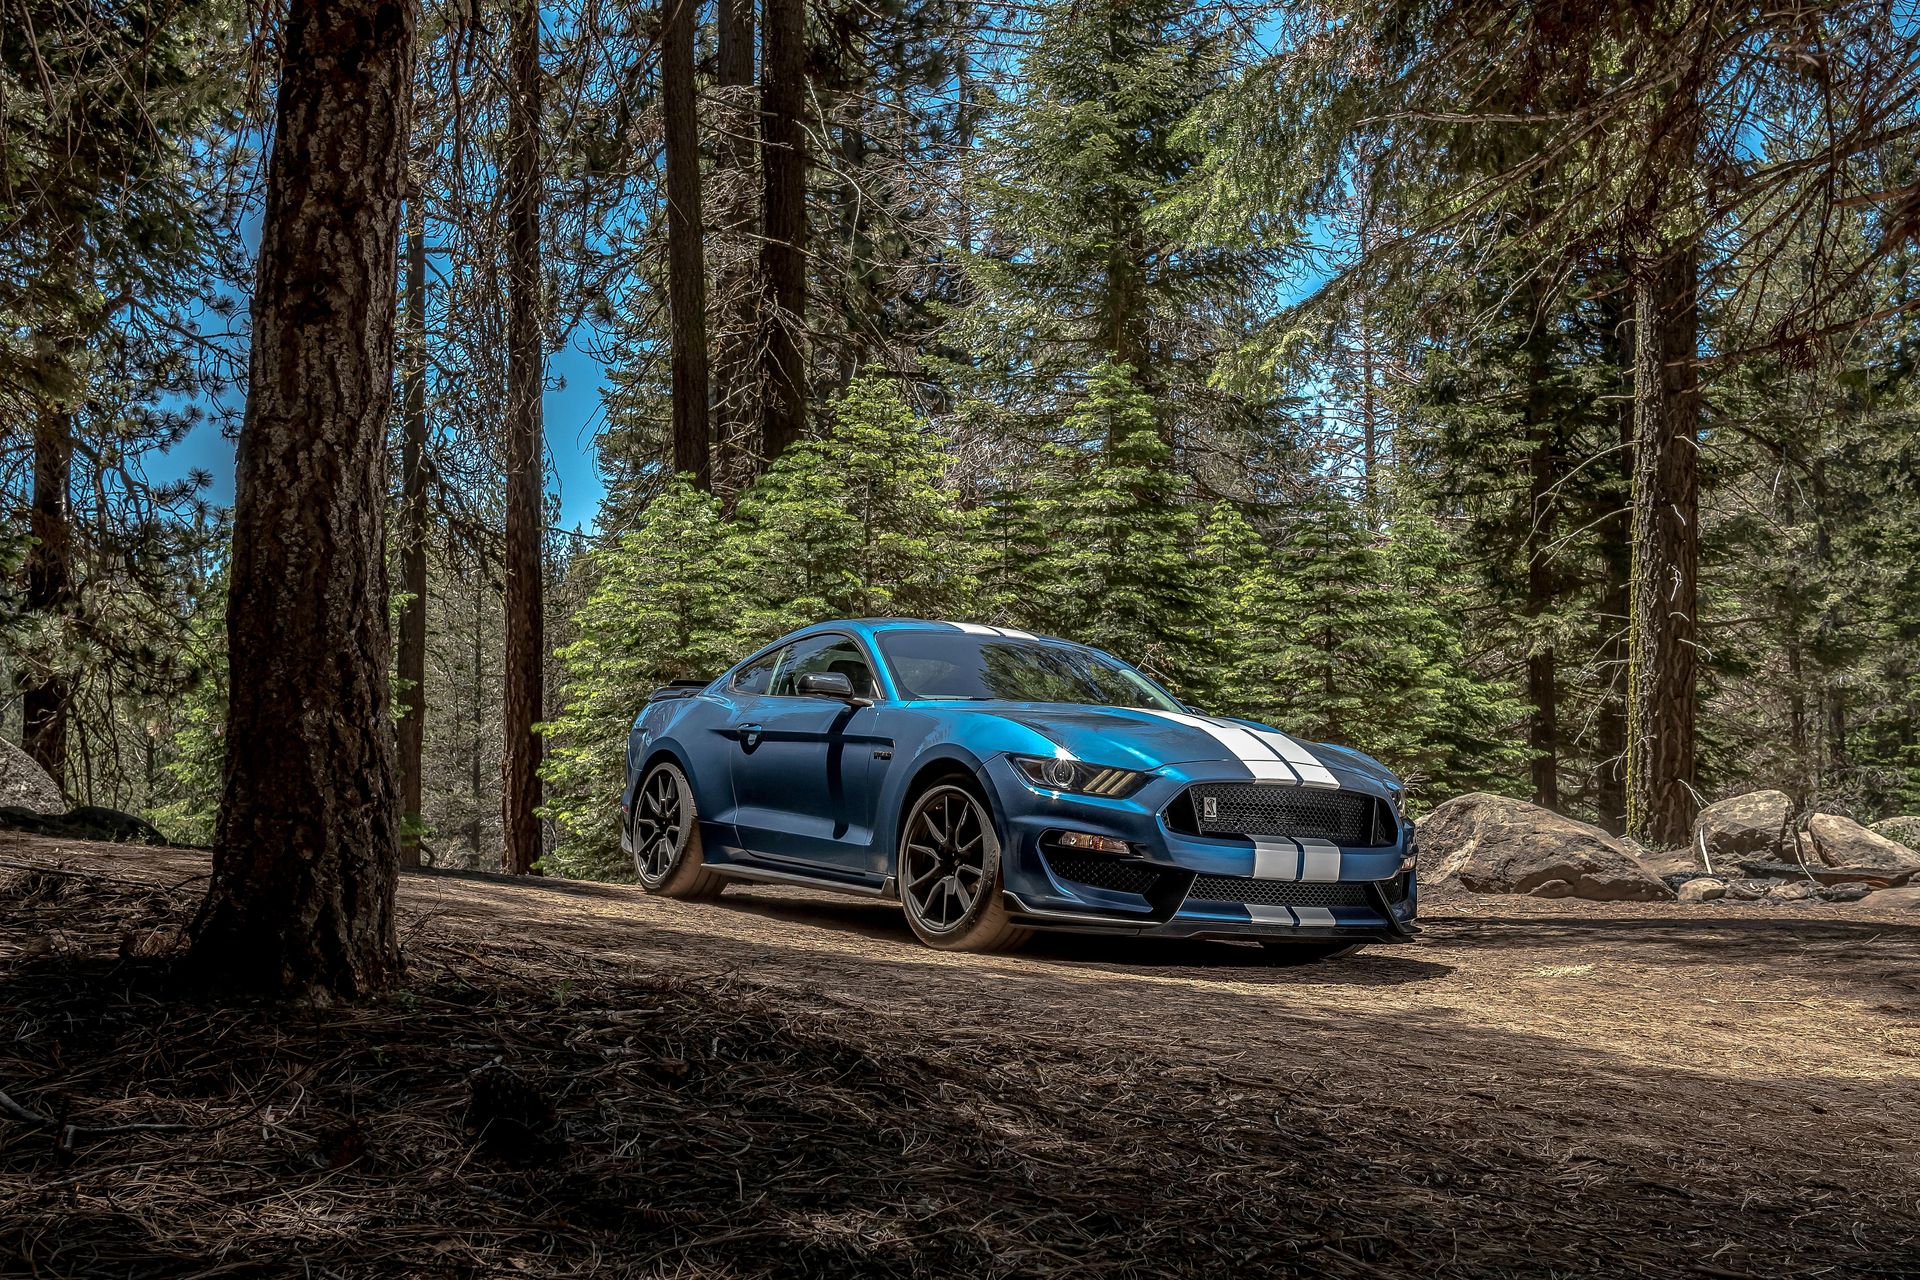 2019-ford-mustang-shelby-gt350-comparison-104-1569444851.jpg